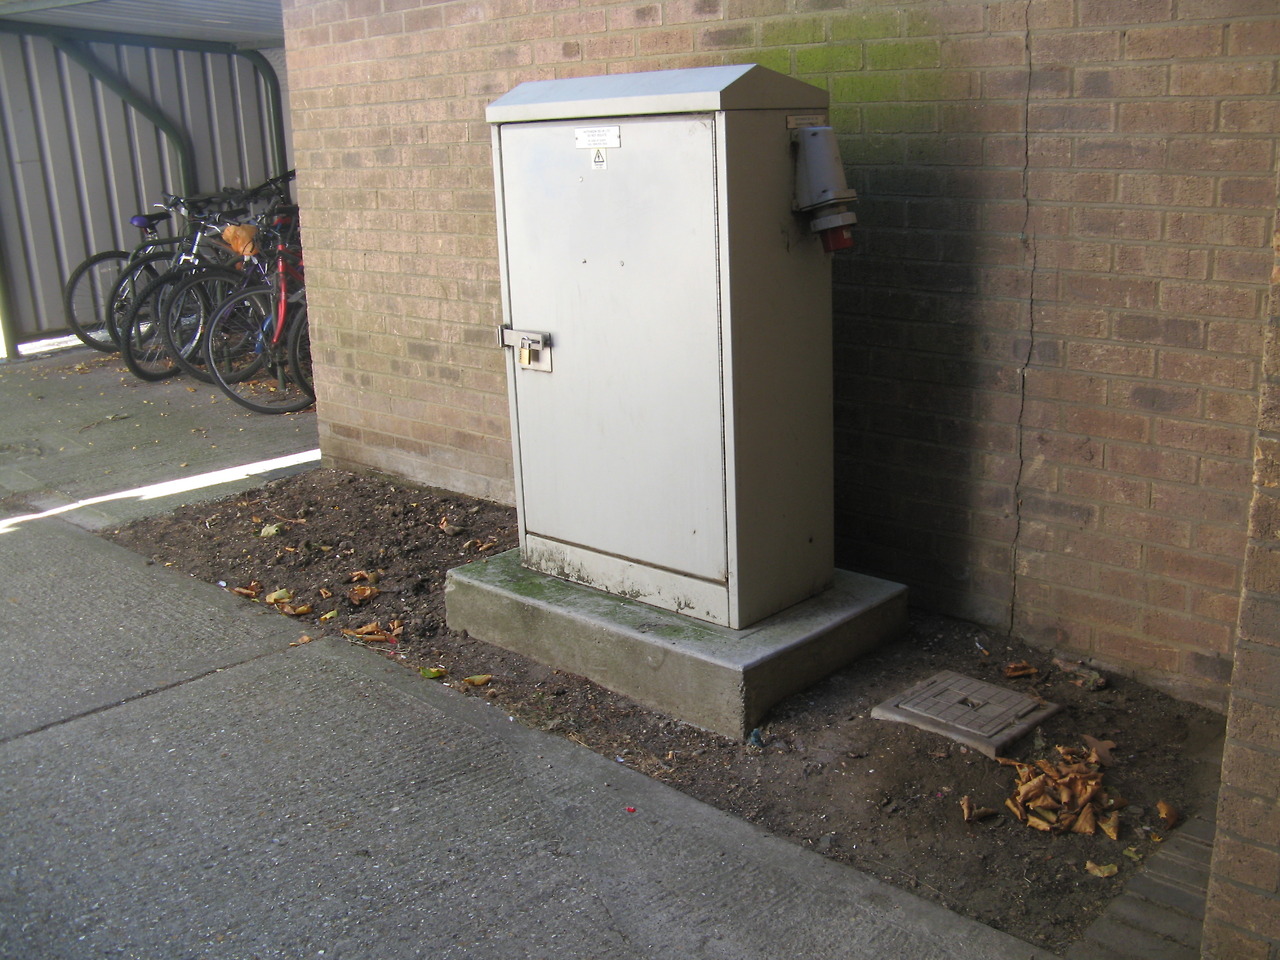 This was the original state of the space. The electrical box was obsolete.